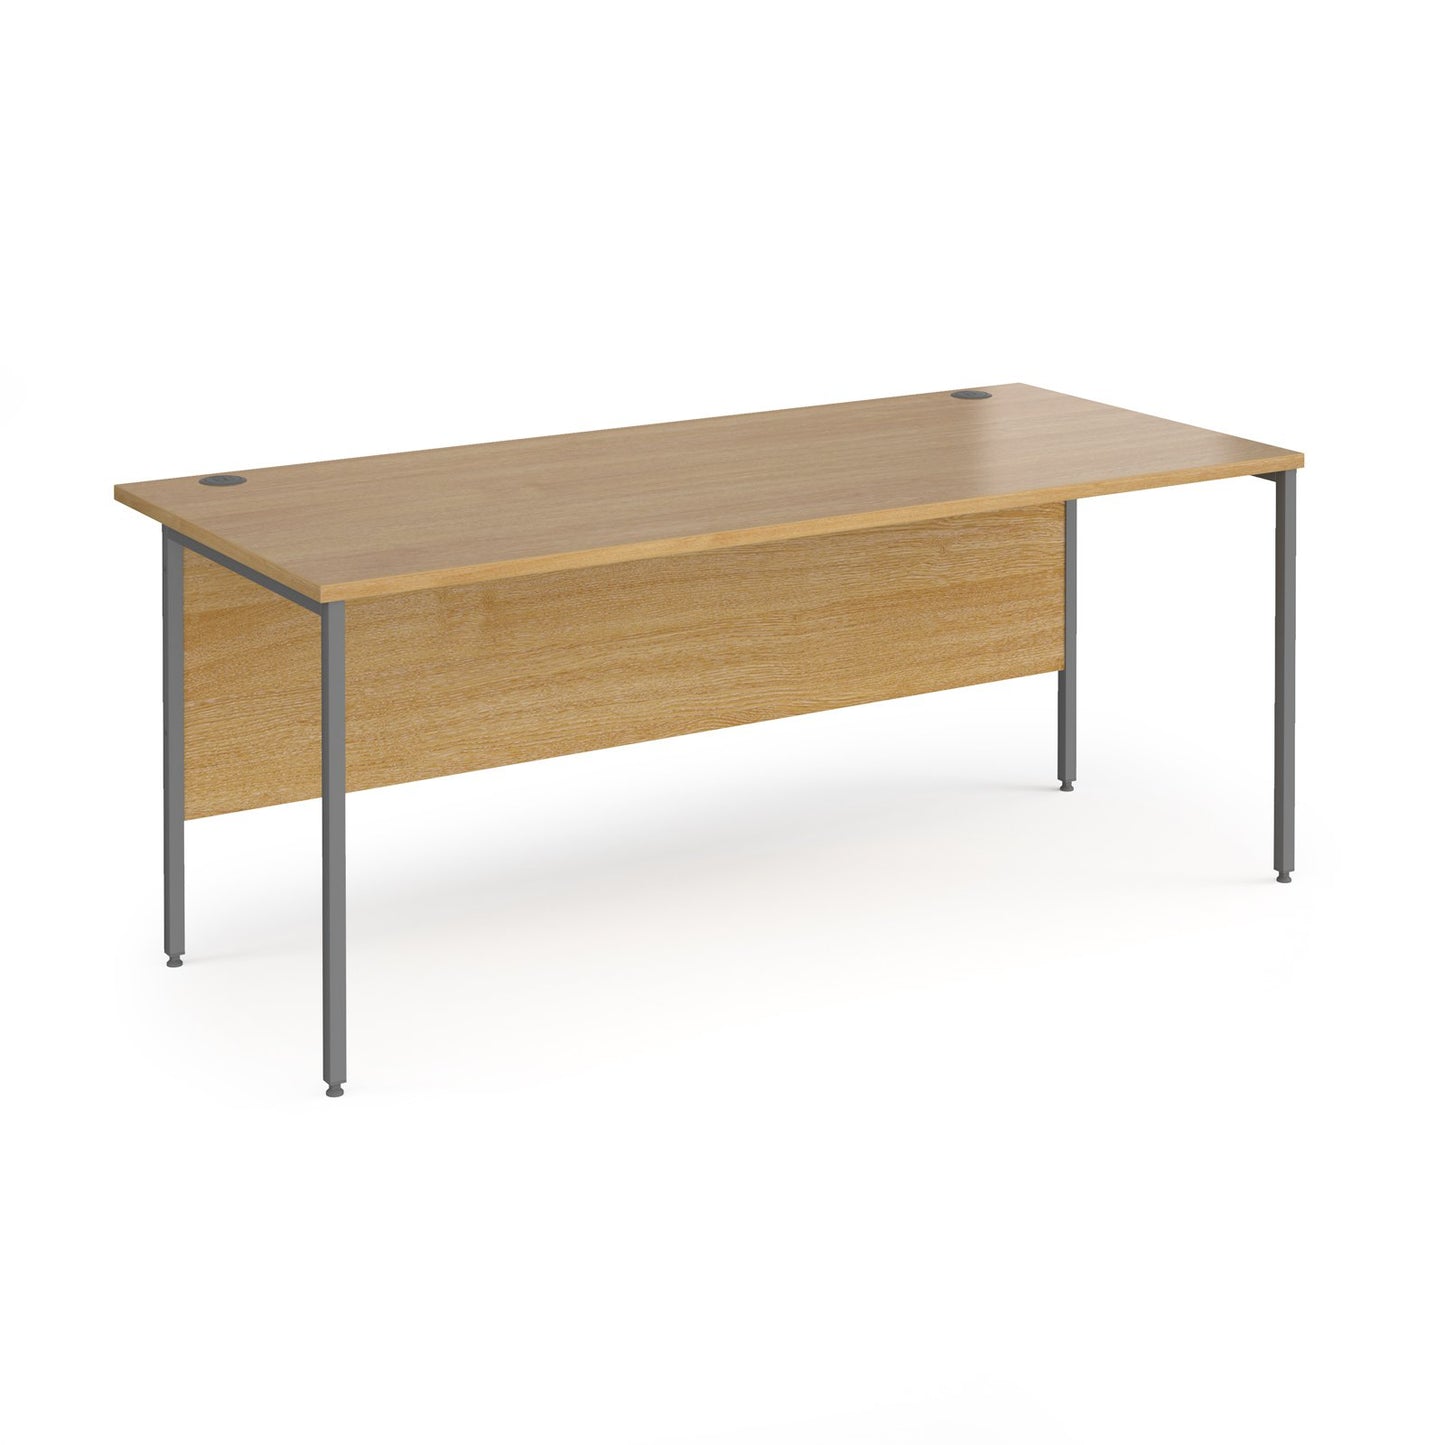 Contract 25 H-Frame straight desk